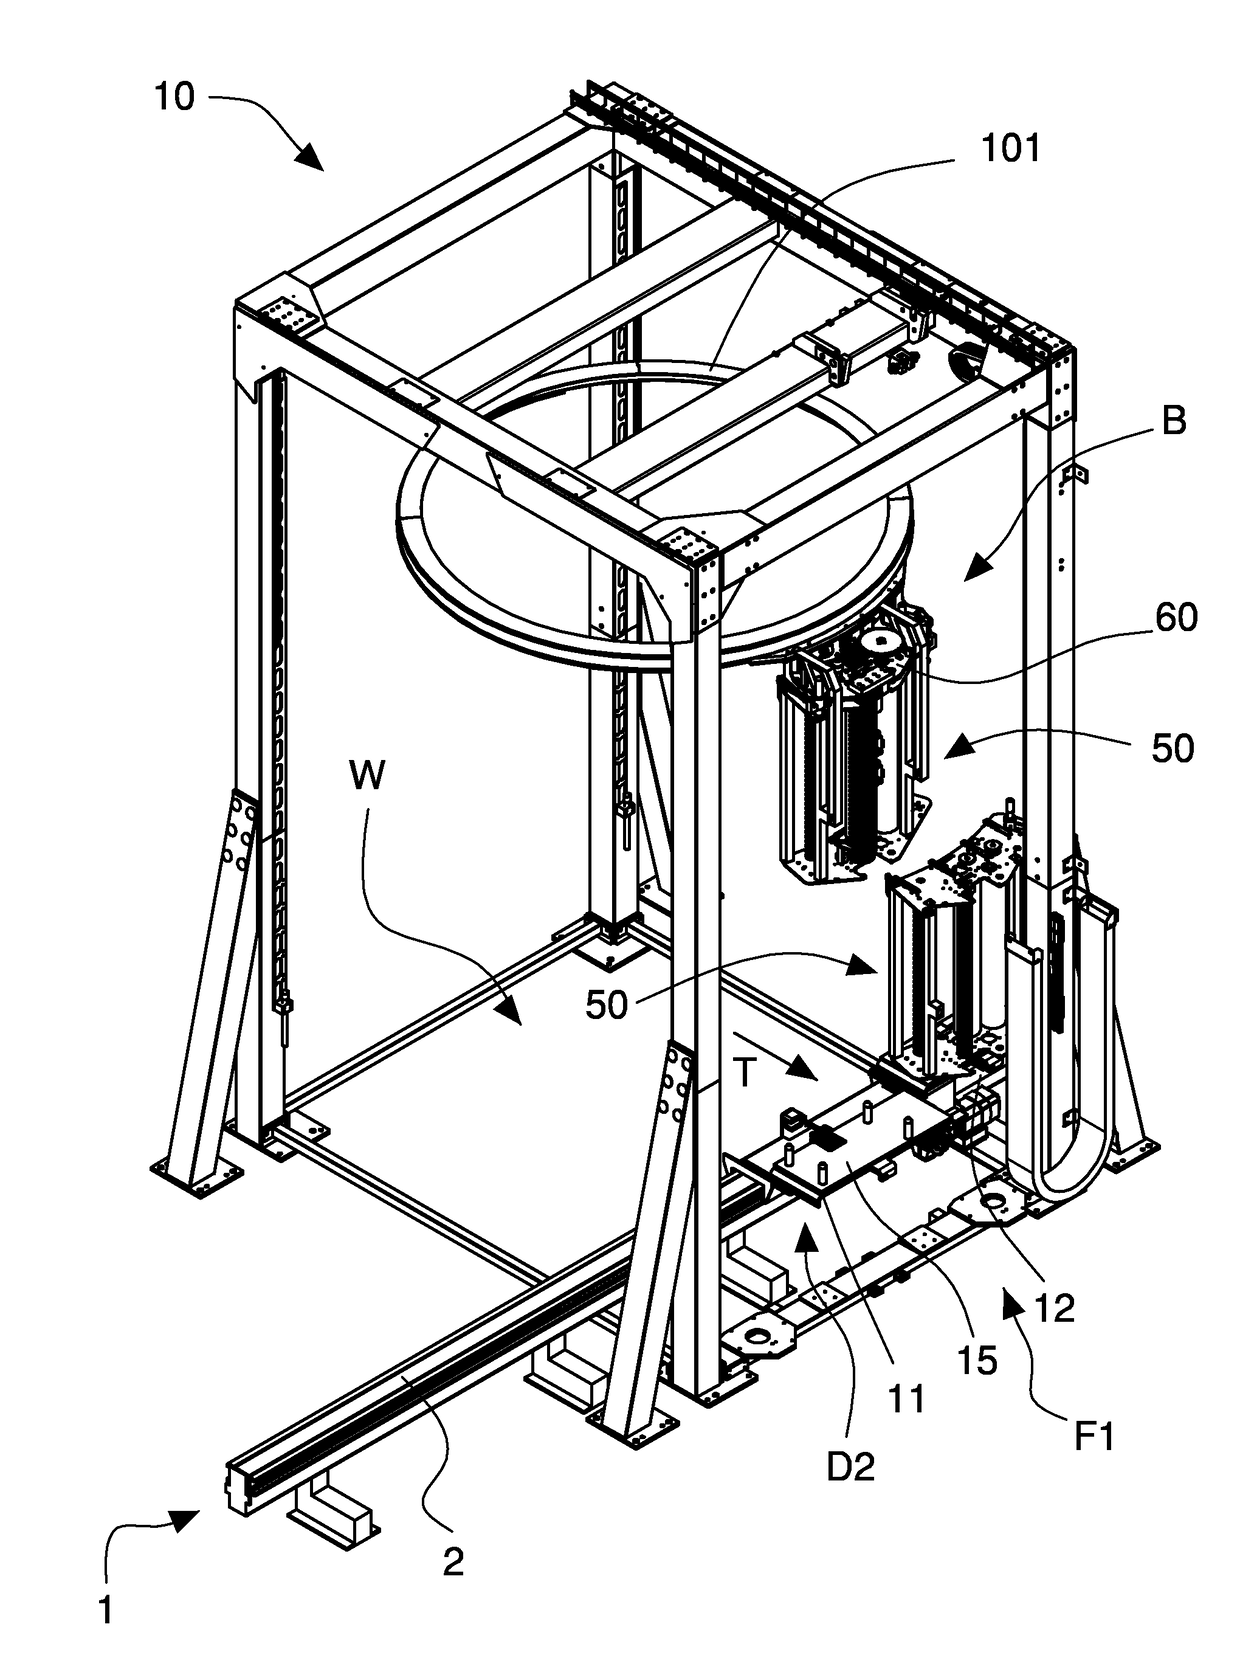 Apparatus and method for changing unwinding units in a wrapping machine, and unwinding apparatus